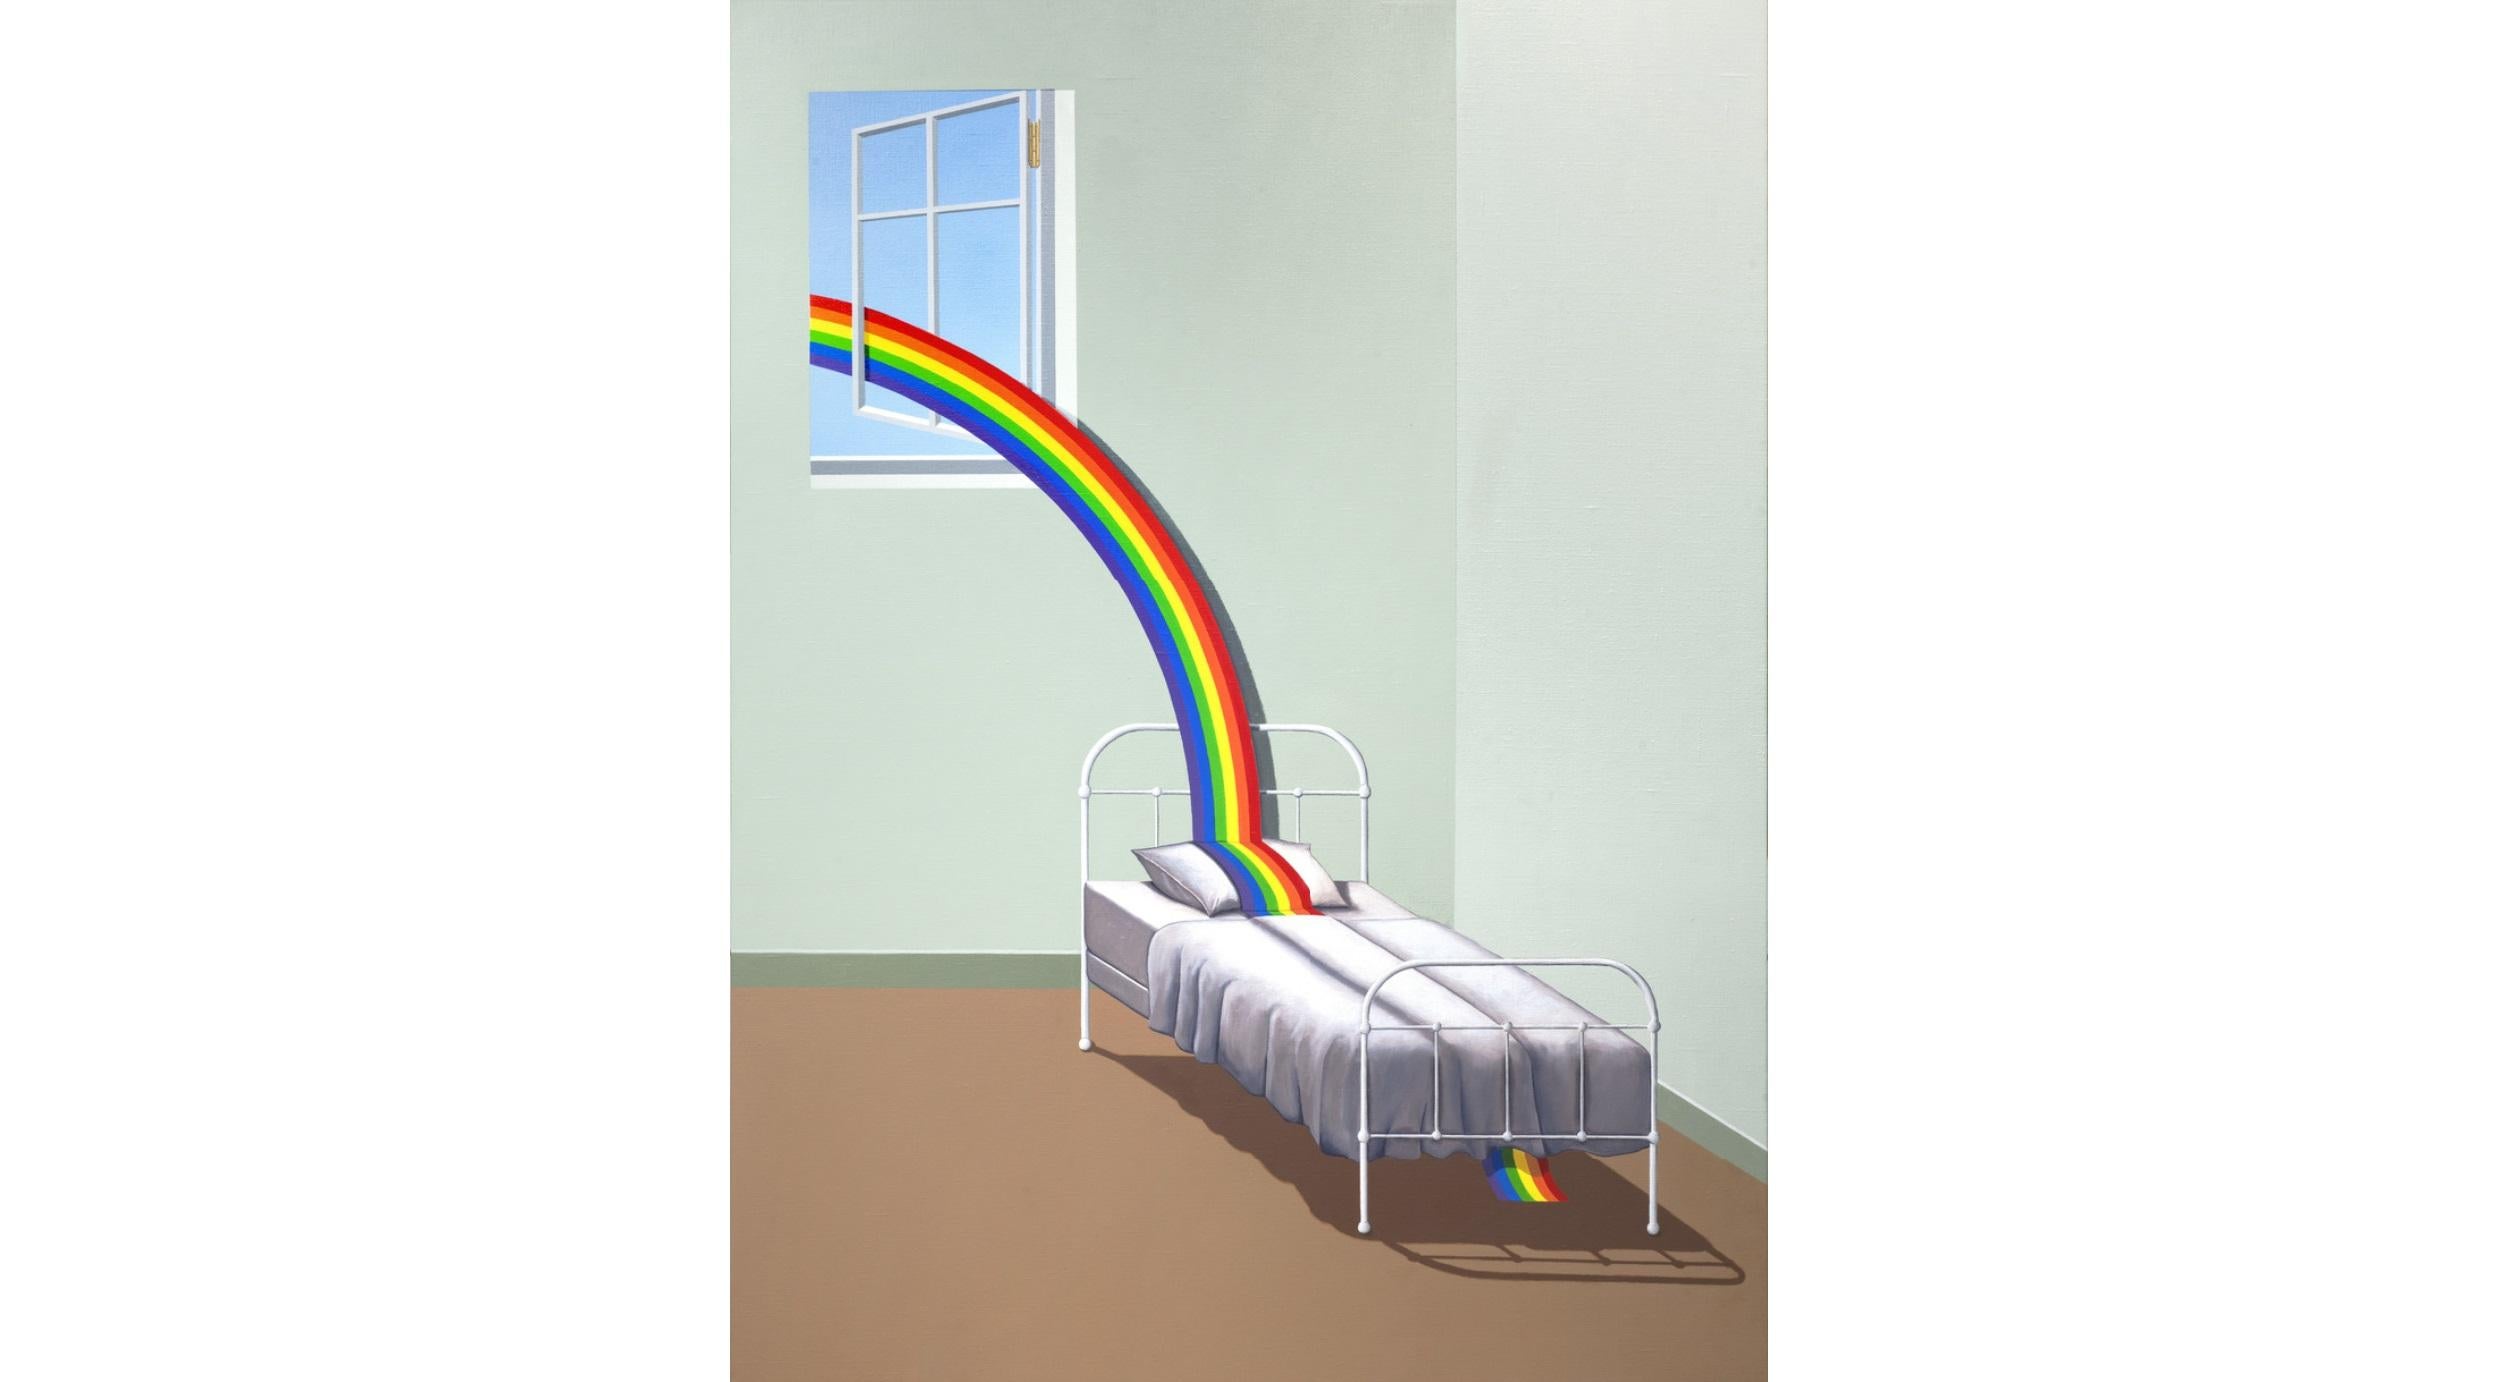 Rainbow Bed, Oil on Canvas Painting by Patrick Hughes, 2019

Patrick Hughes’s paintings and wall reliefs wittily address art history and the nature of perception and perspective. He invented an optical illusion called “reverspective,” a neologism